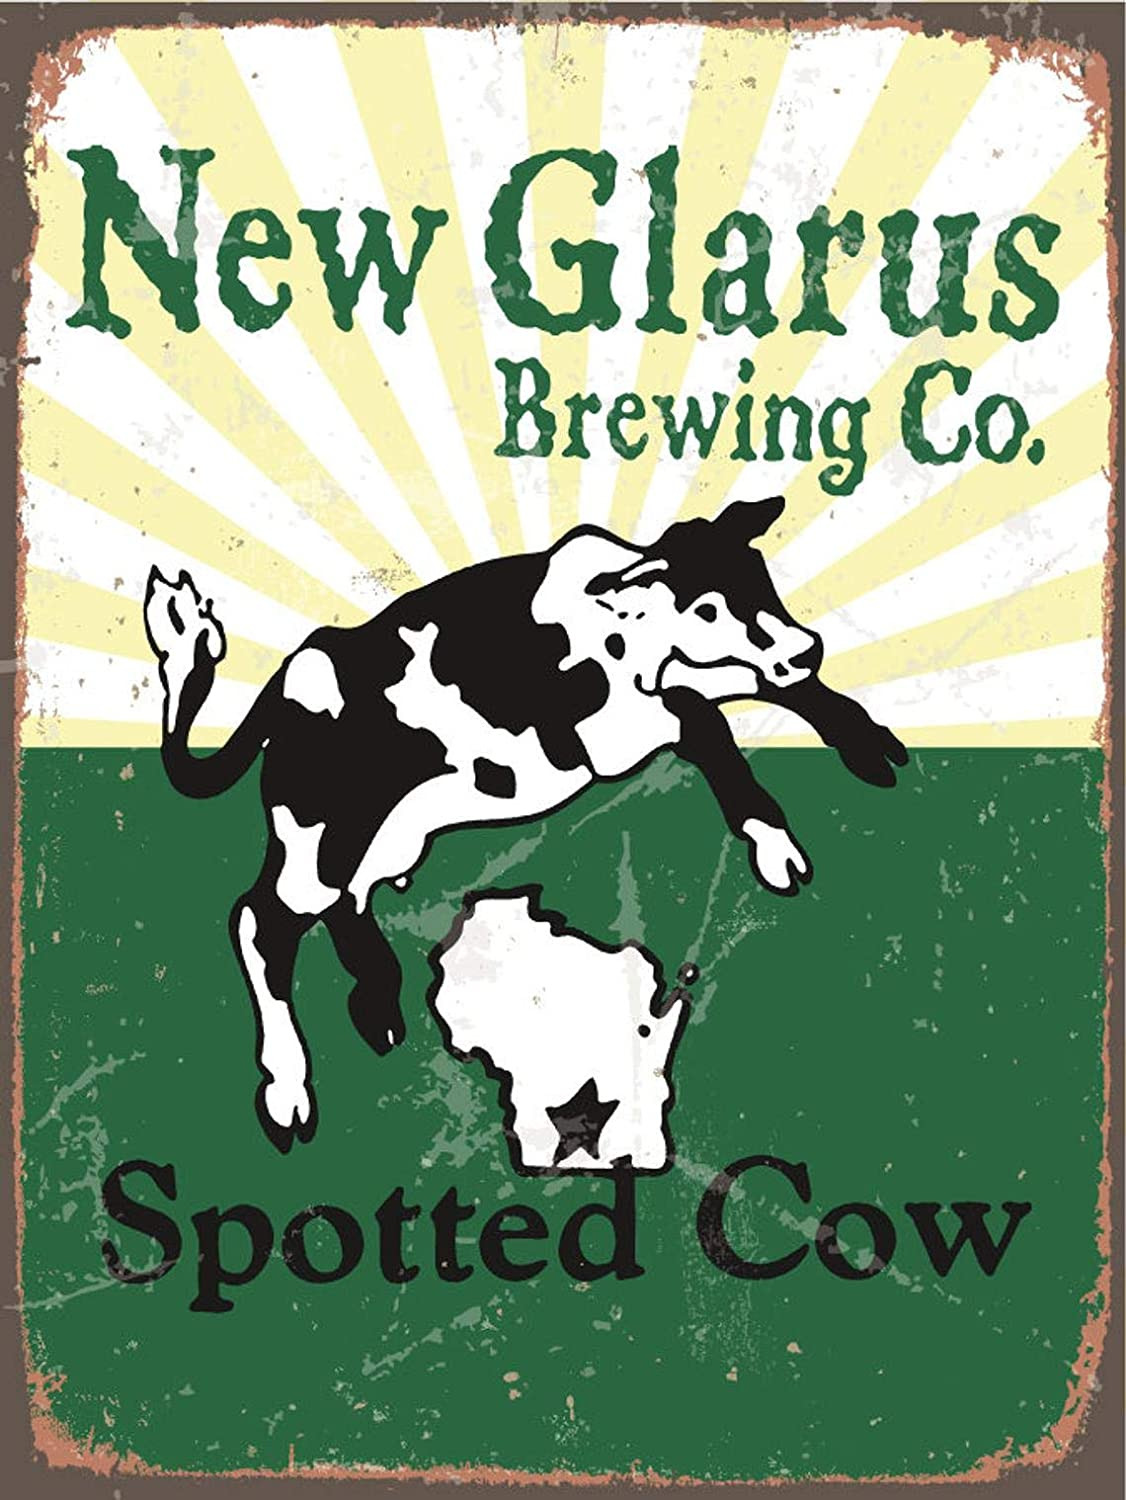 Spotted Cow Beer Vintage Replica Tin Sign 8X12 Inches Retro Vintage Decor Sign M